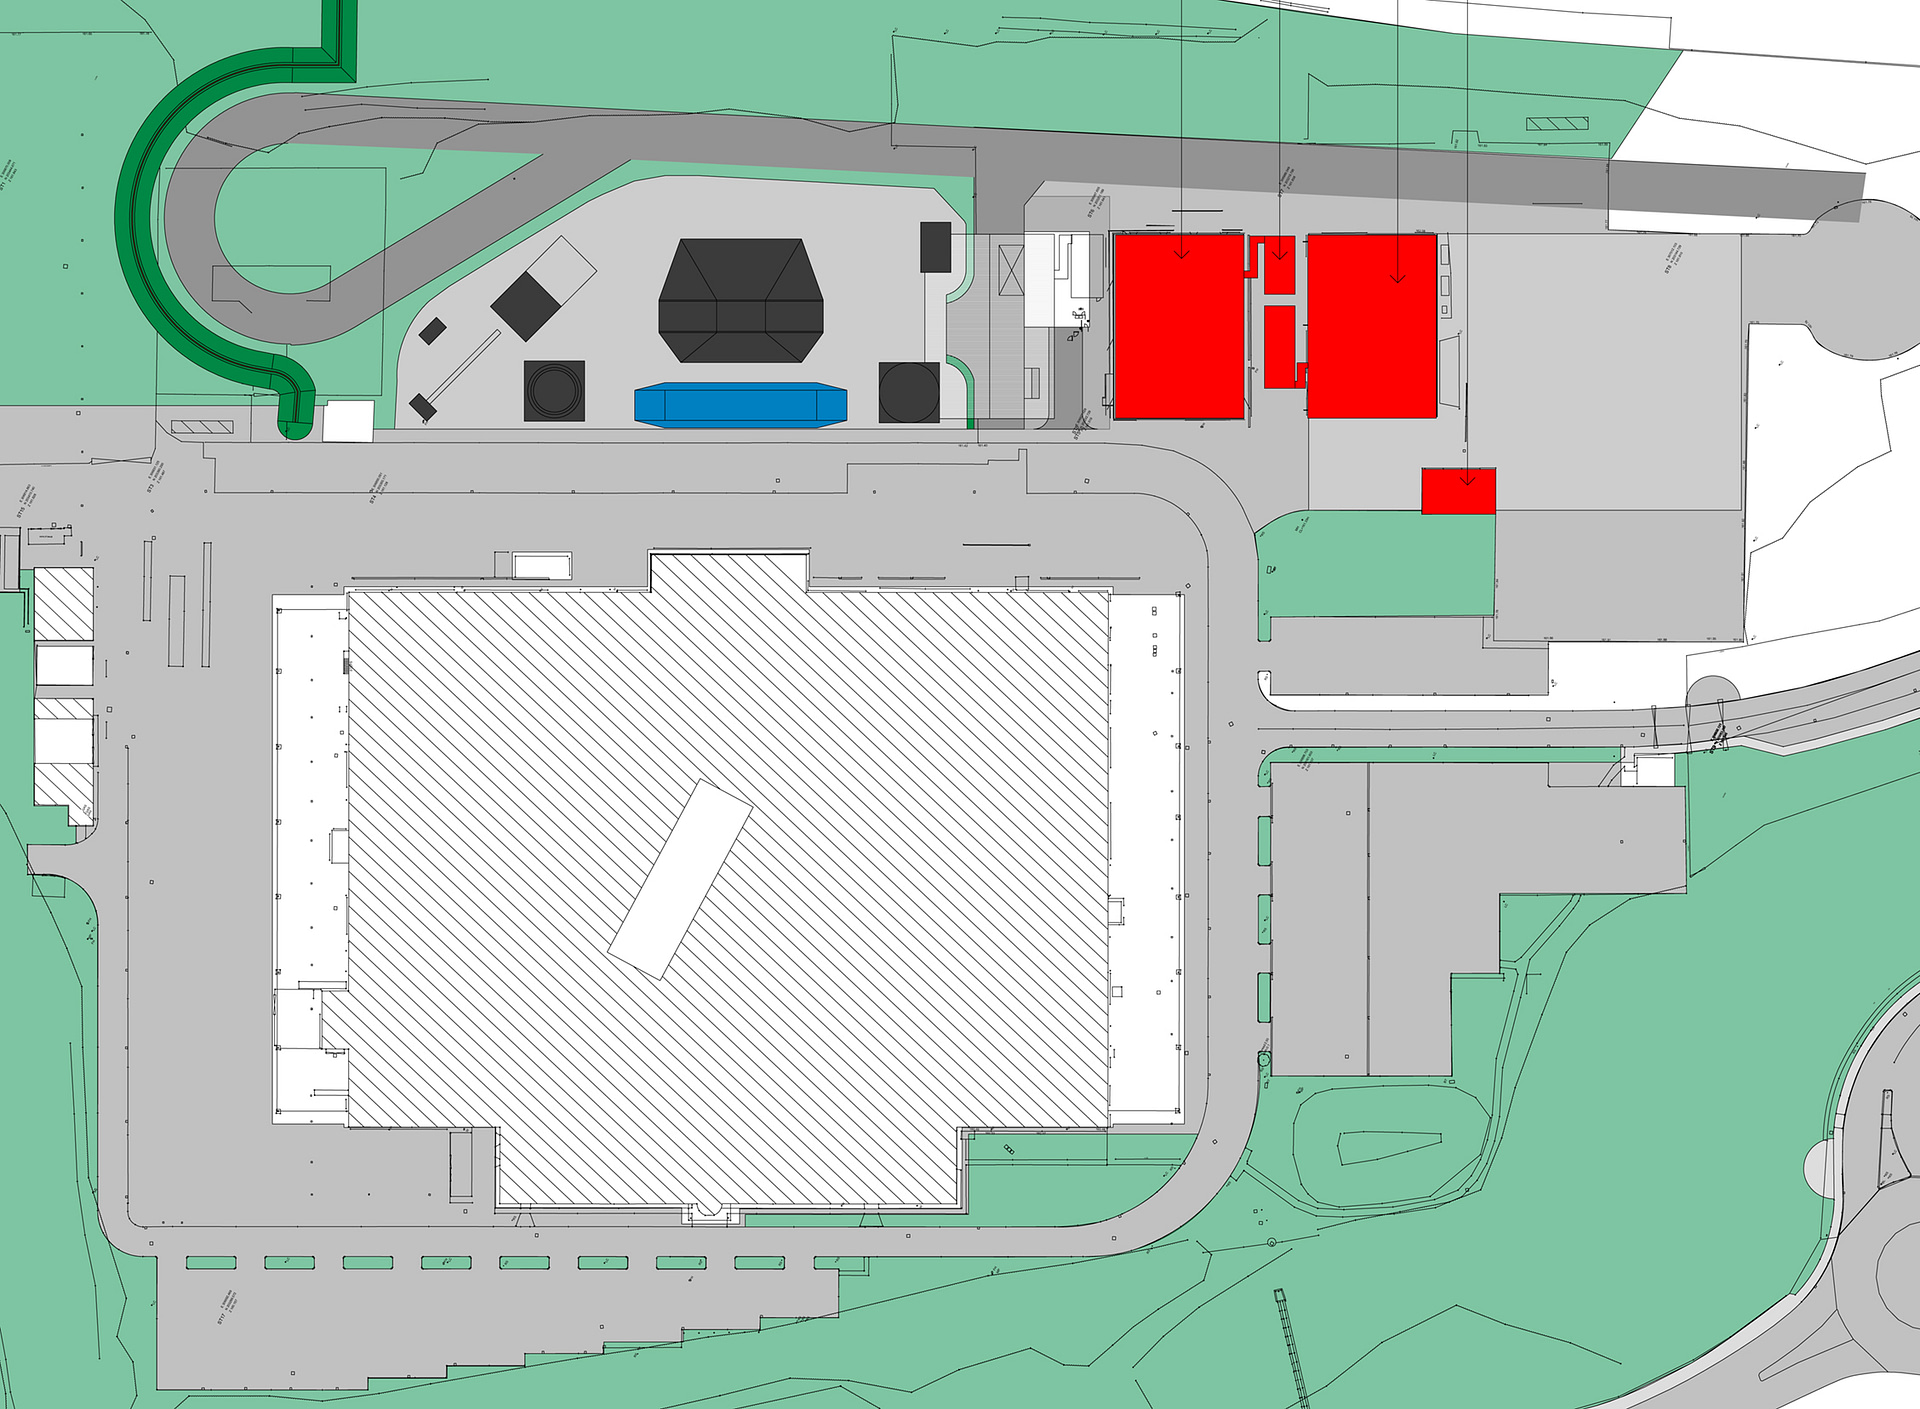 Assembly Facility for General Dynamics, Merthyr Tydfil, Wales - Site Plan